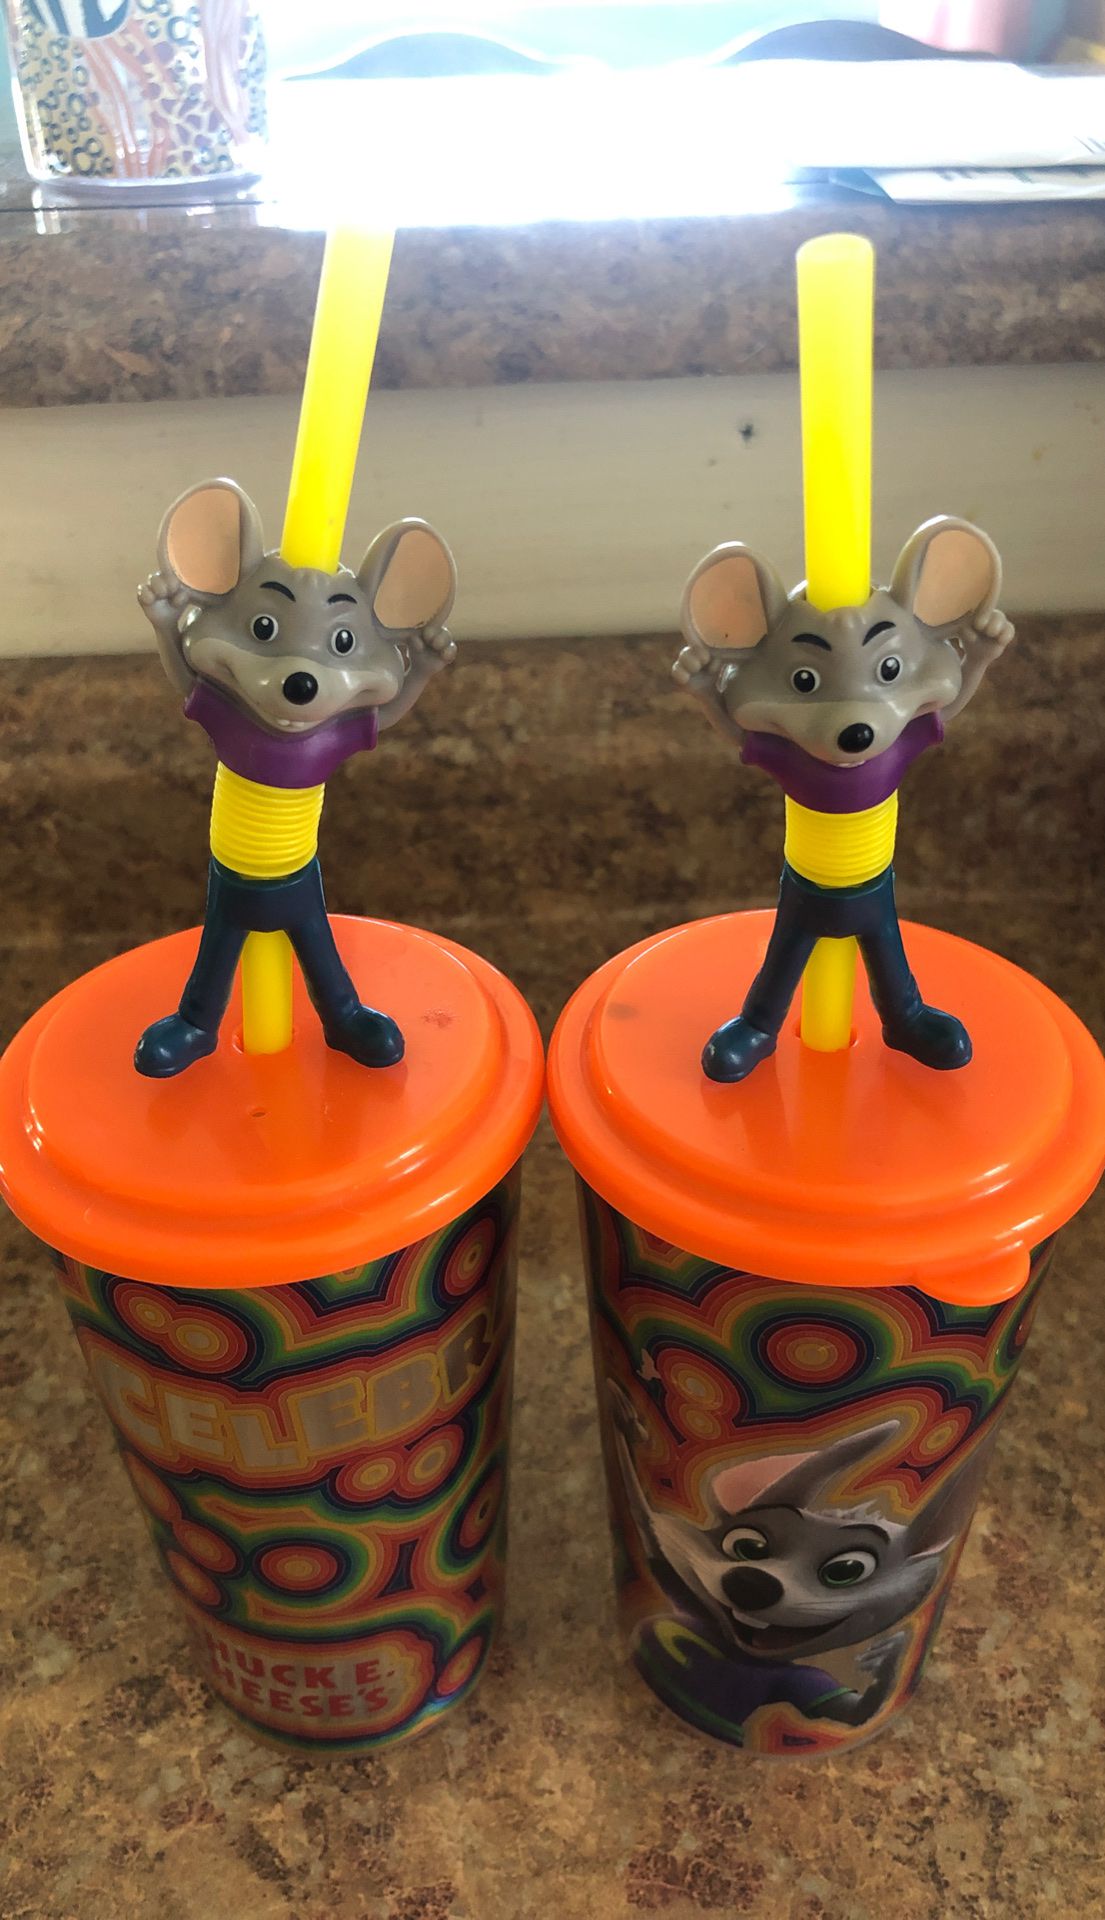 Chuck E Cheese cups with bendy straw